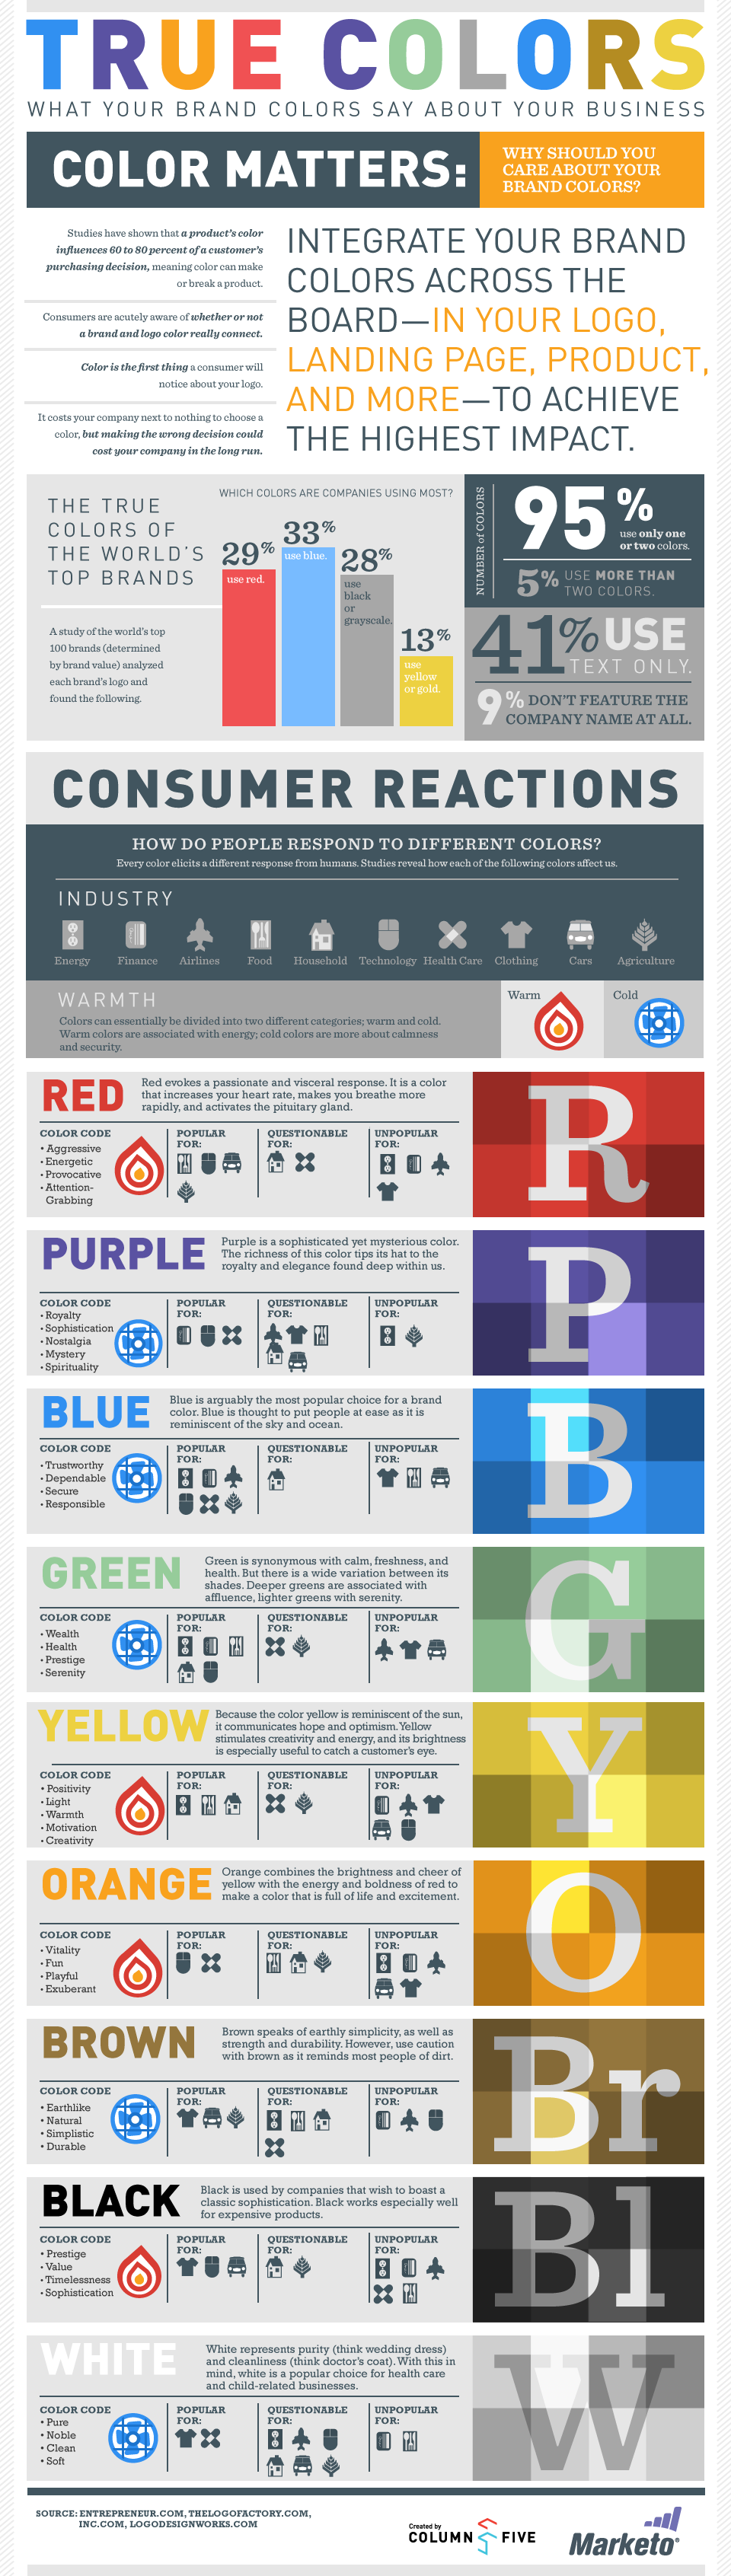 You Brand's COlor Scheme Says a Lot About You